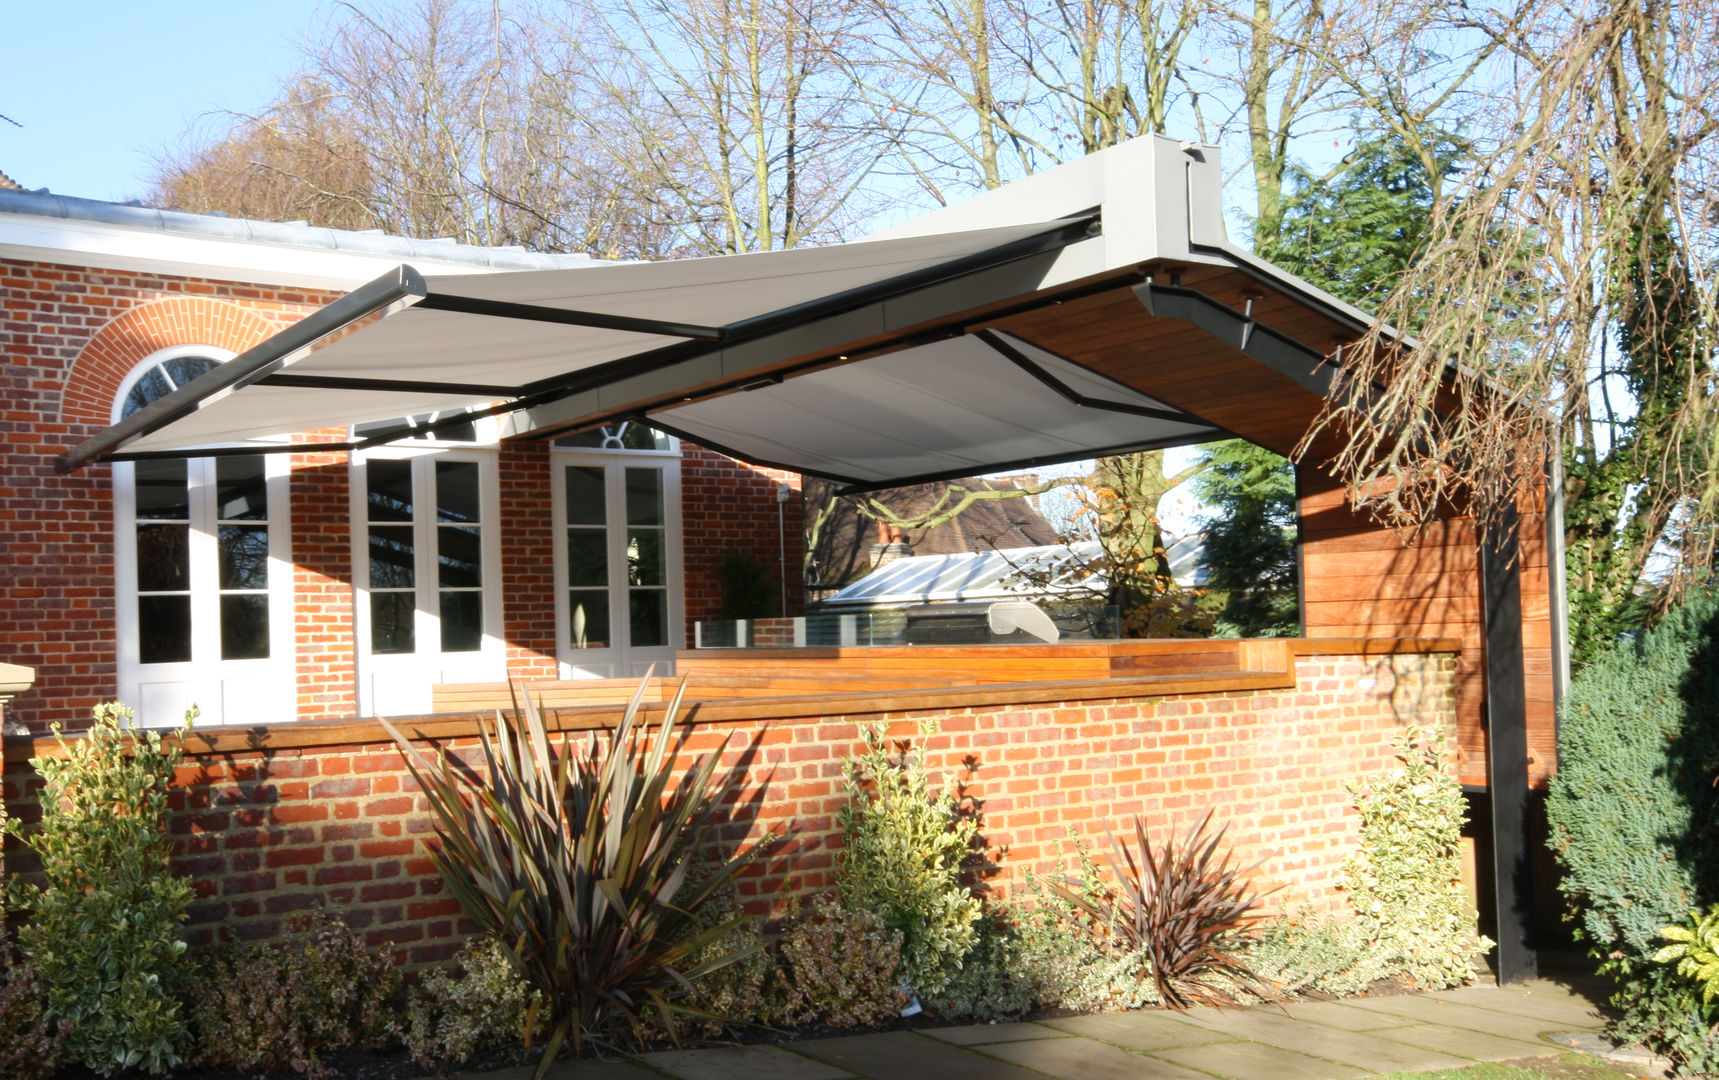 Patio Awning Installation in Cheshire. homify Terrace patio,awning,terrace,canopy,garden,alfresco,shading